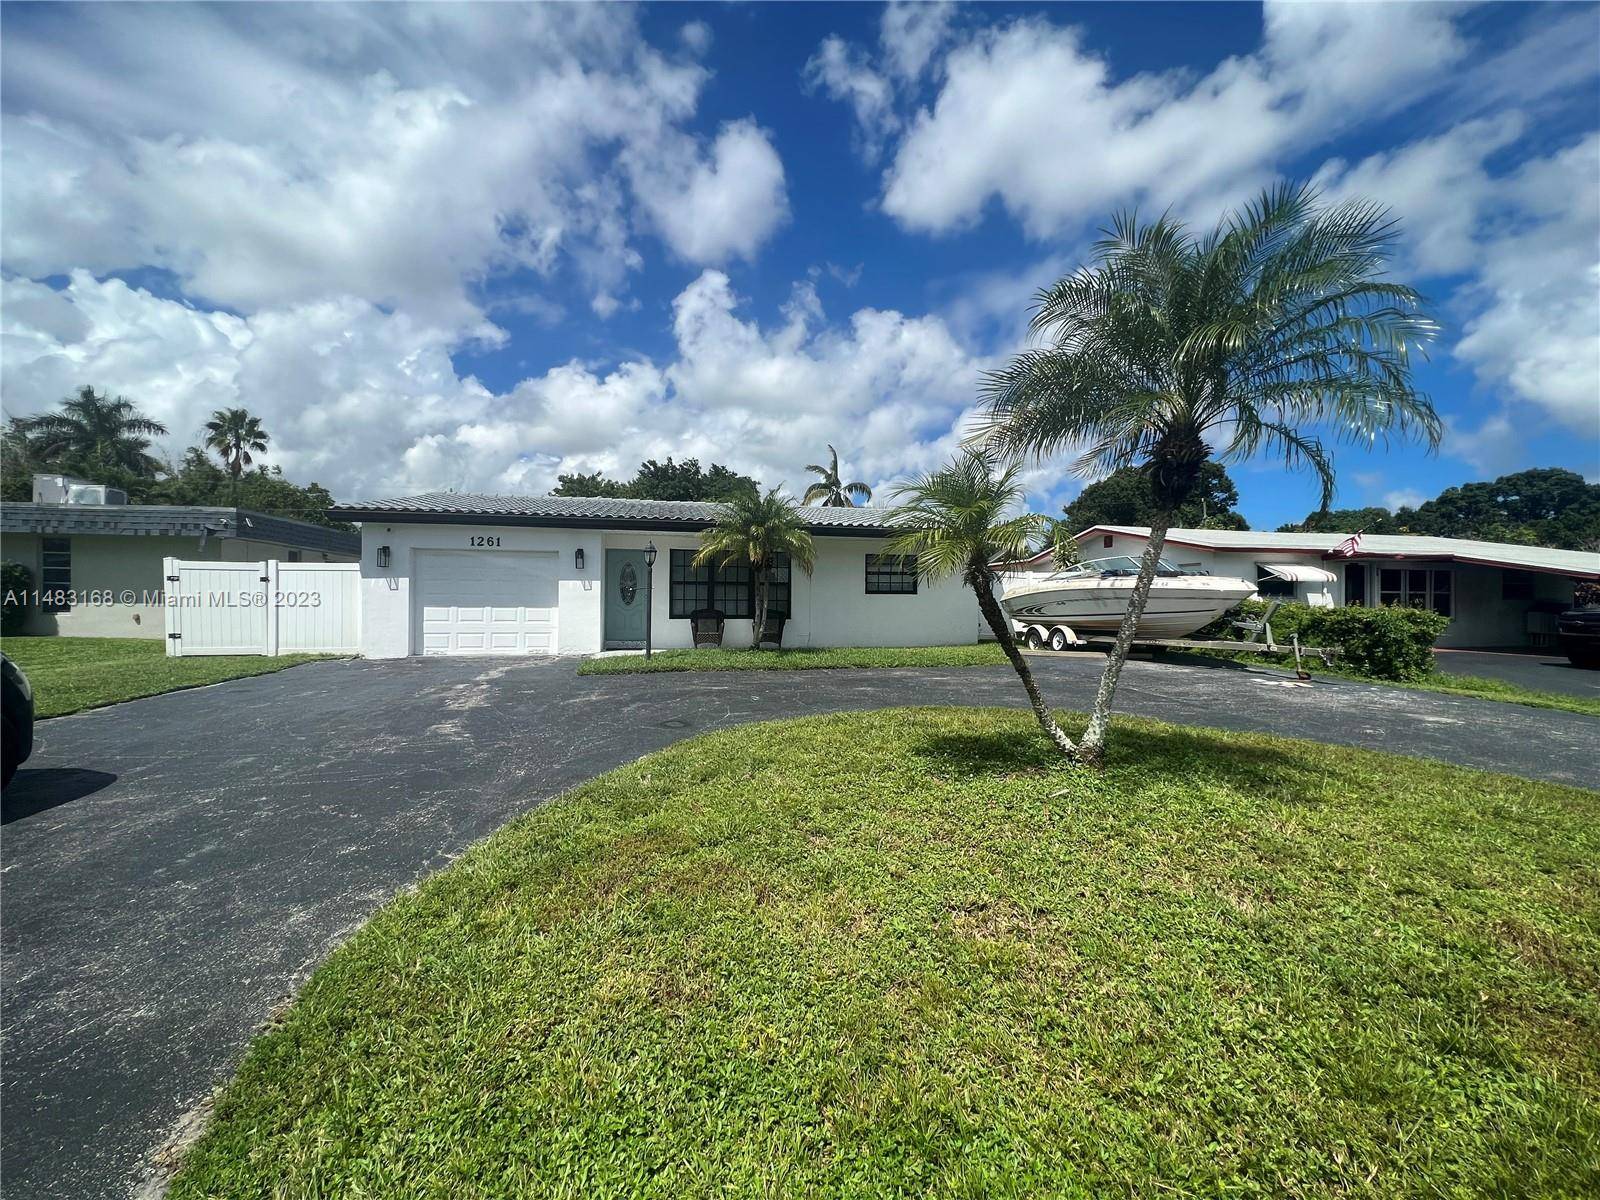 BEAUTIFUL 3 BEDROOMS AND 2 BATHROOMS HOUSE, WITH AMAZING NICE AND FENCE PRIVATE PATIO WITH SPARKLING POOL, BRIGHT AND OPEN FLOOR PLAN, NICE SIDE FOR FAMILY AND DINNING ROOM PLUS ...